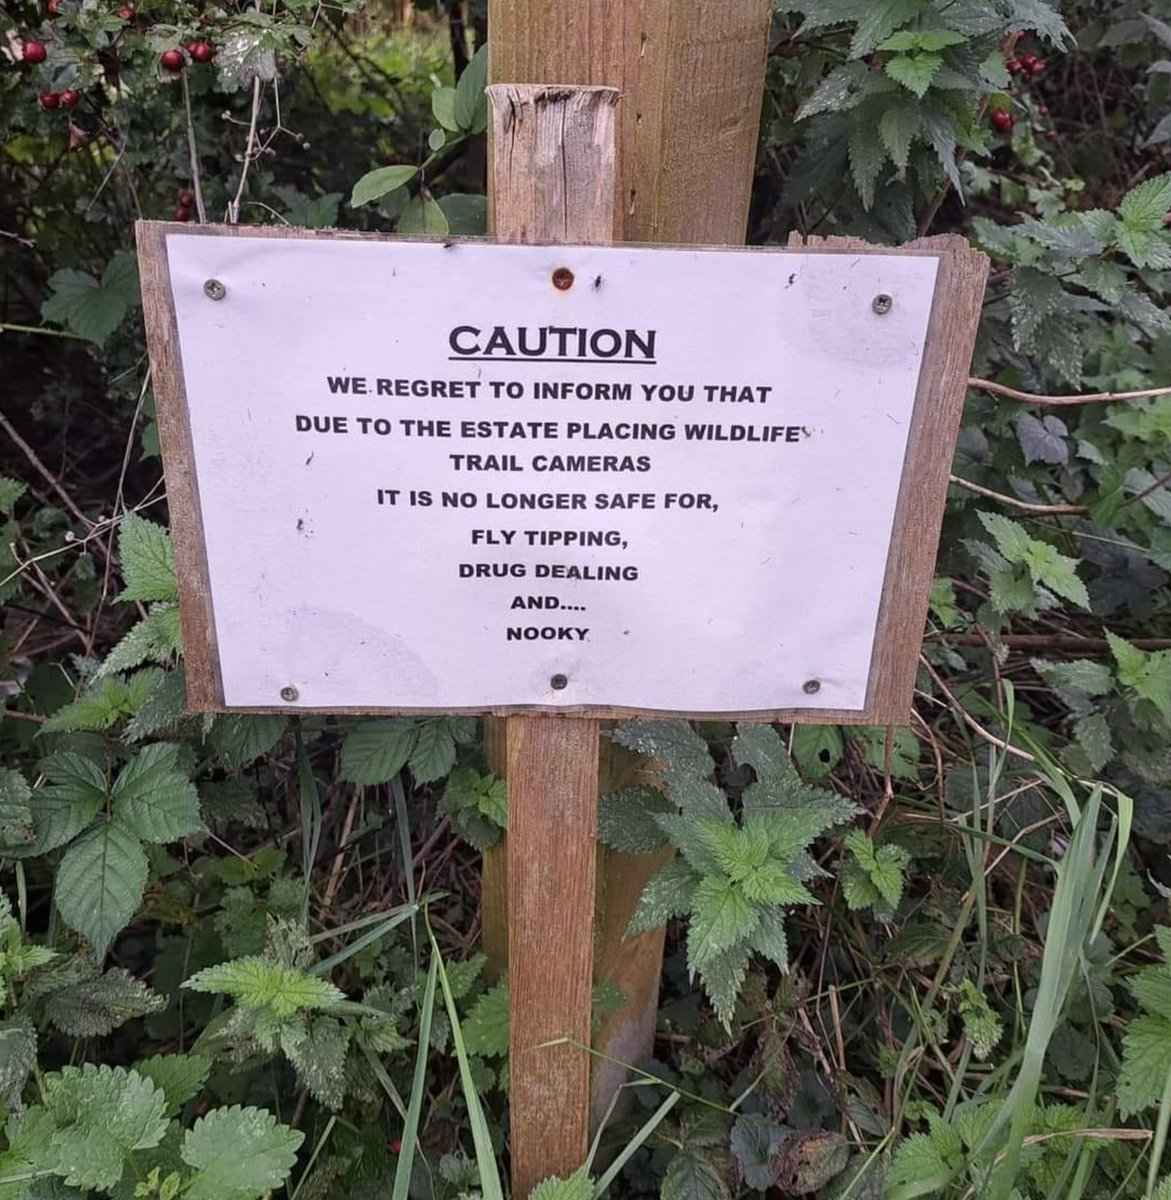 A local community group have put these up - ruining everyone's fun.